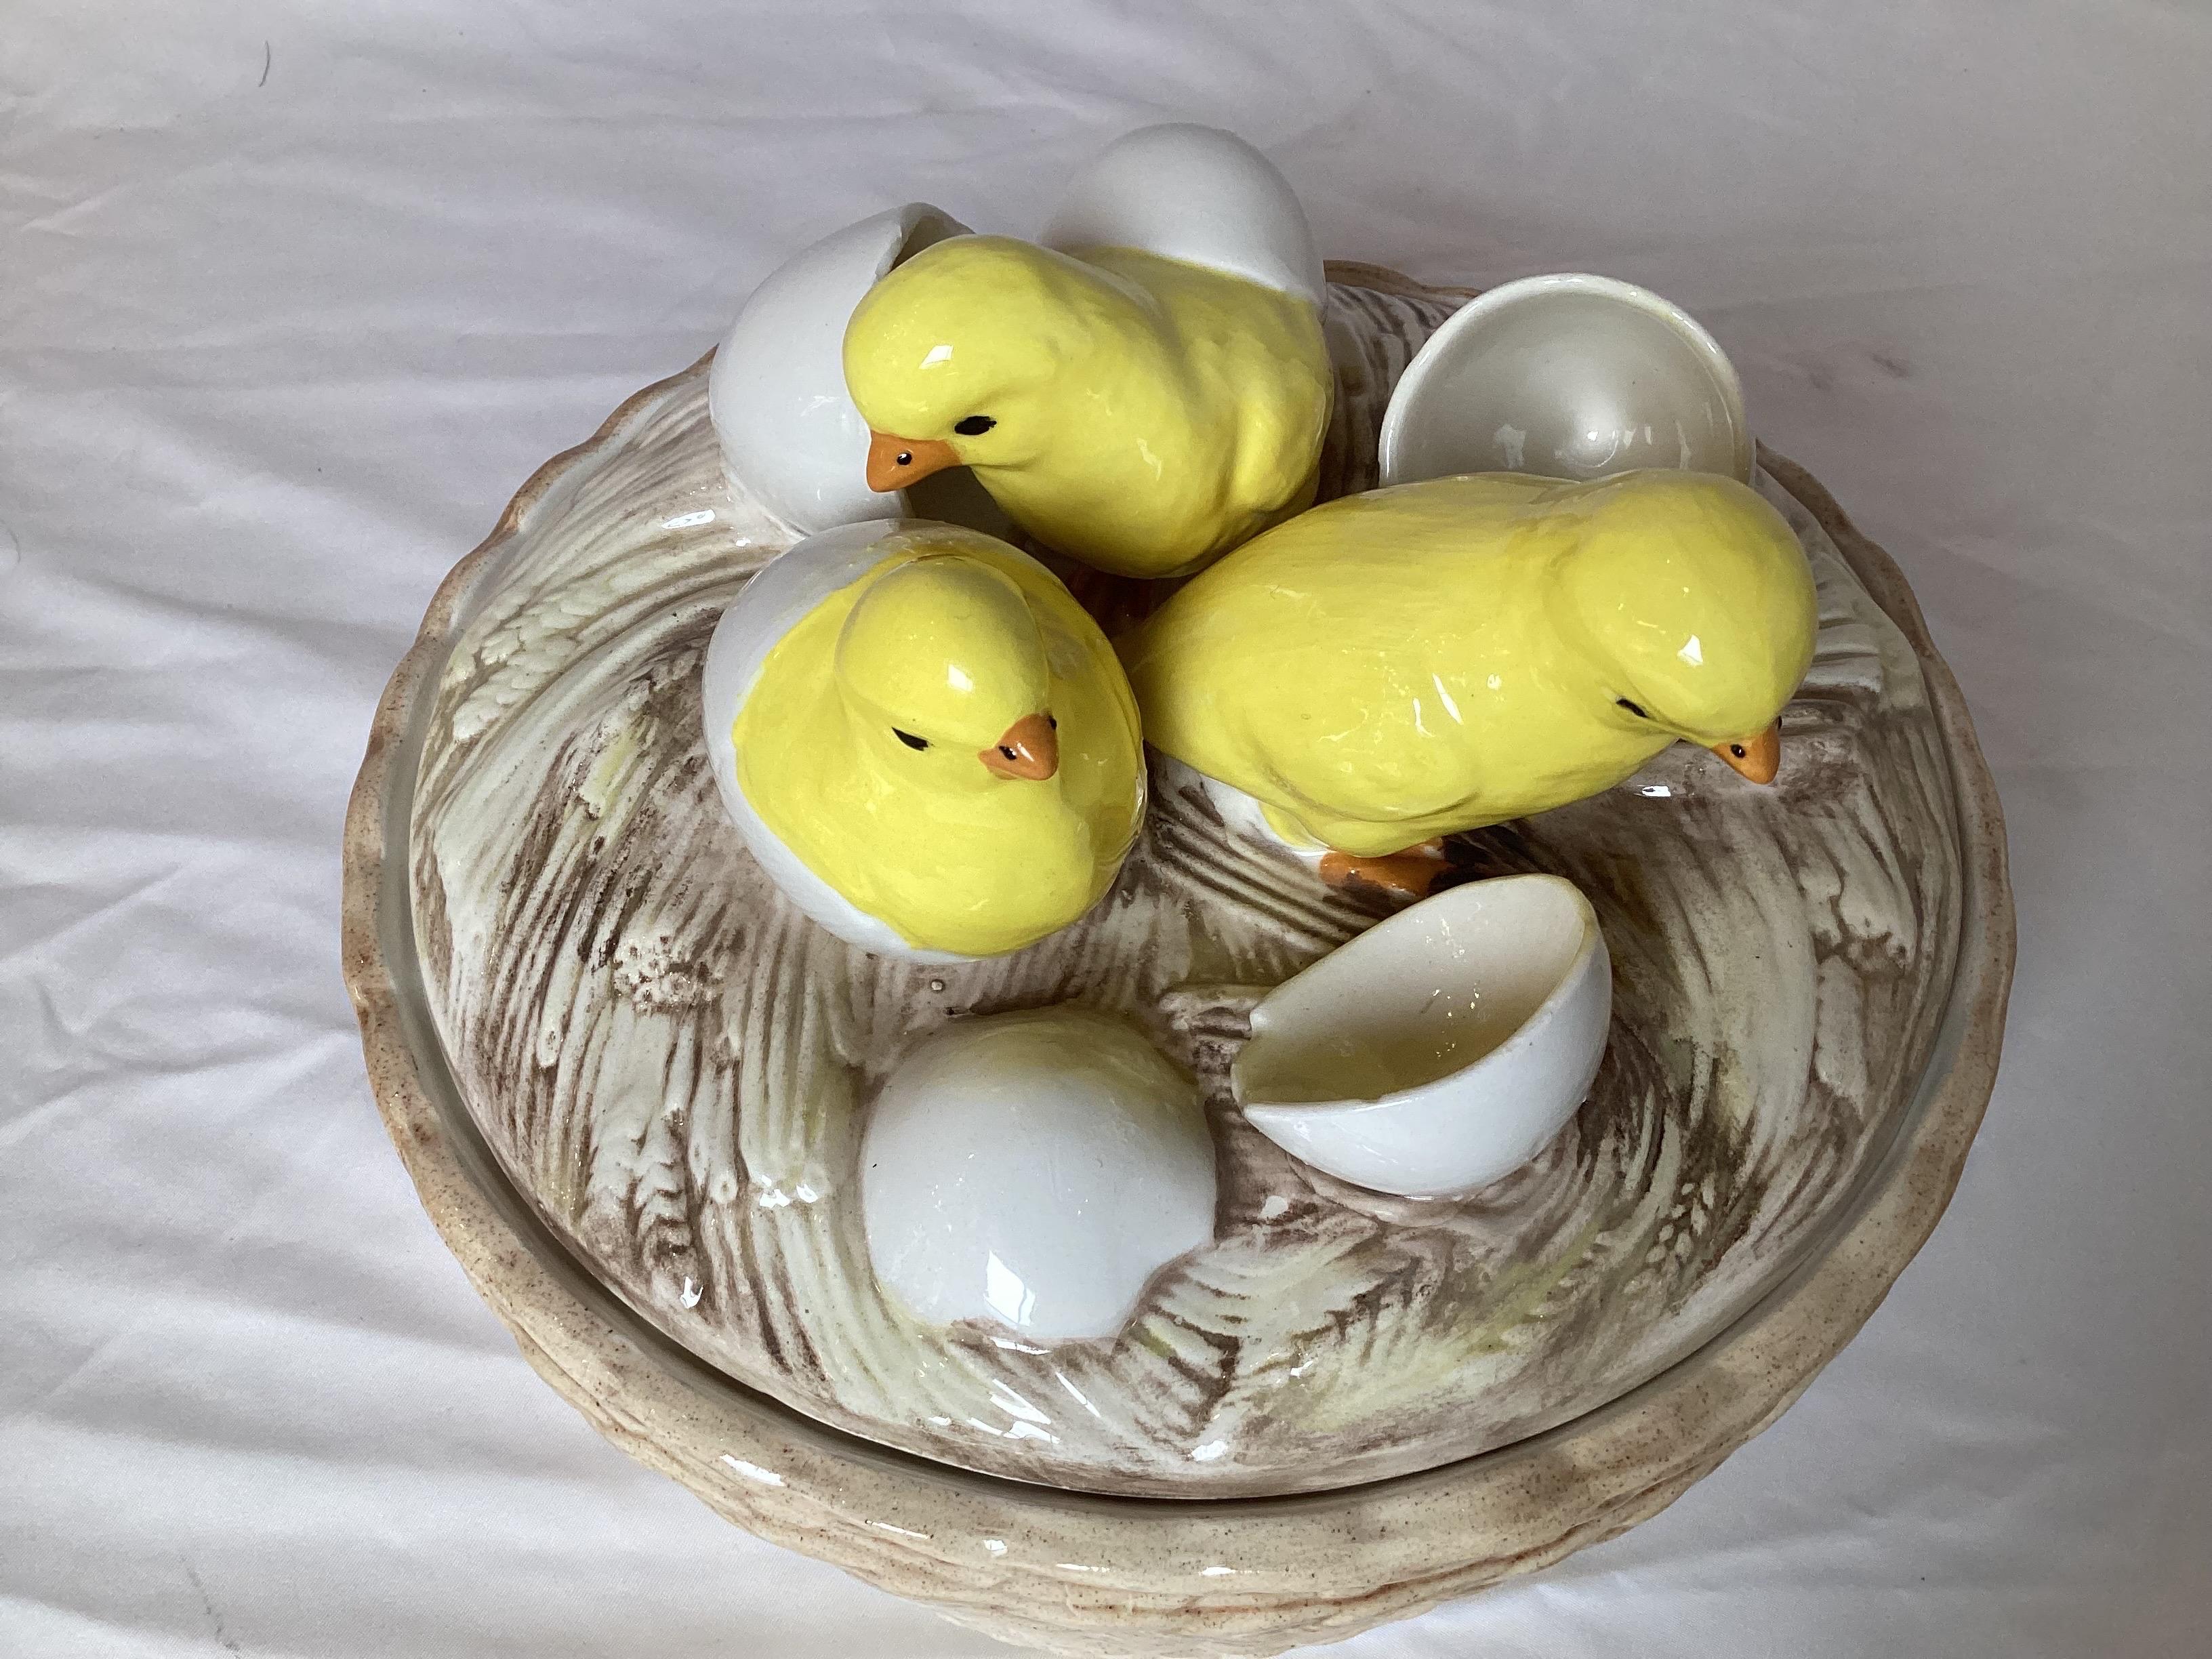 Whimsical covered ceramic basket with chicks and eggs, Hand made in Italy, mid-20th century, 6.5 inches high, 8 inches in diameter.